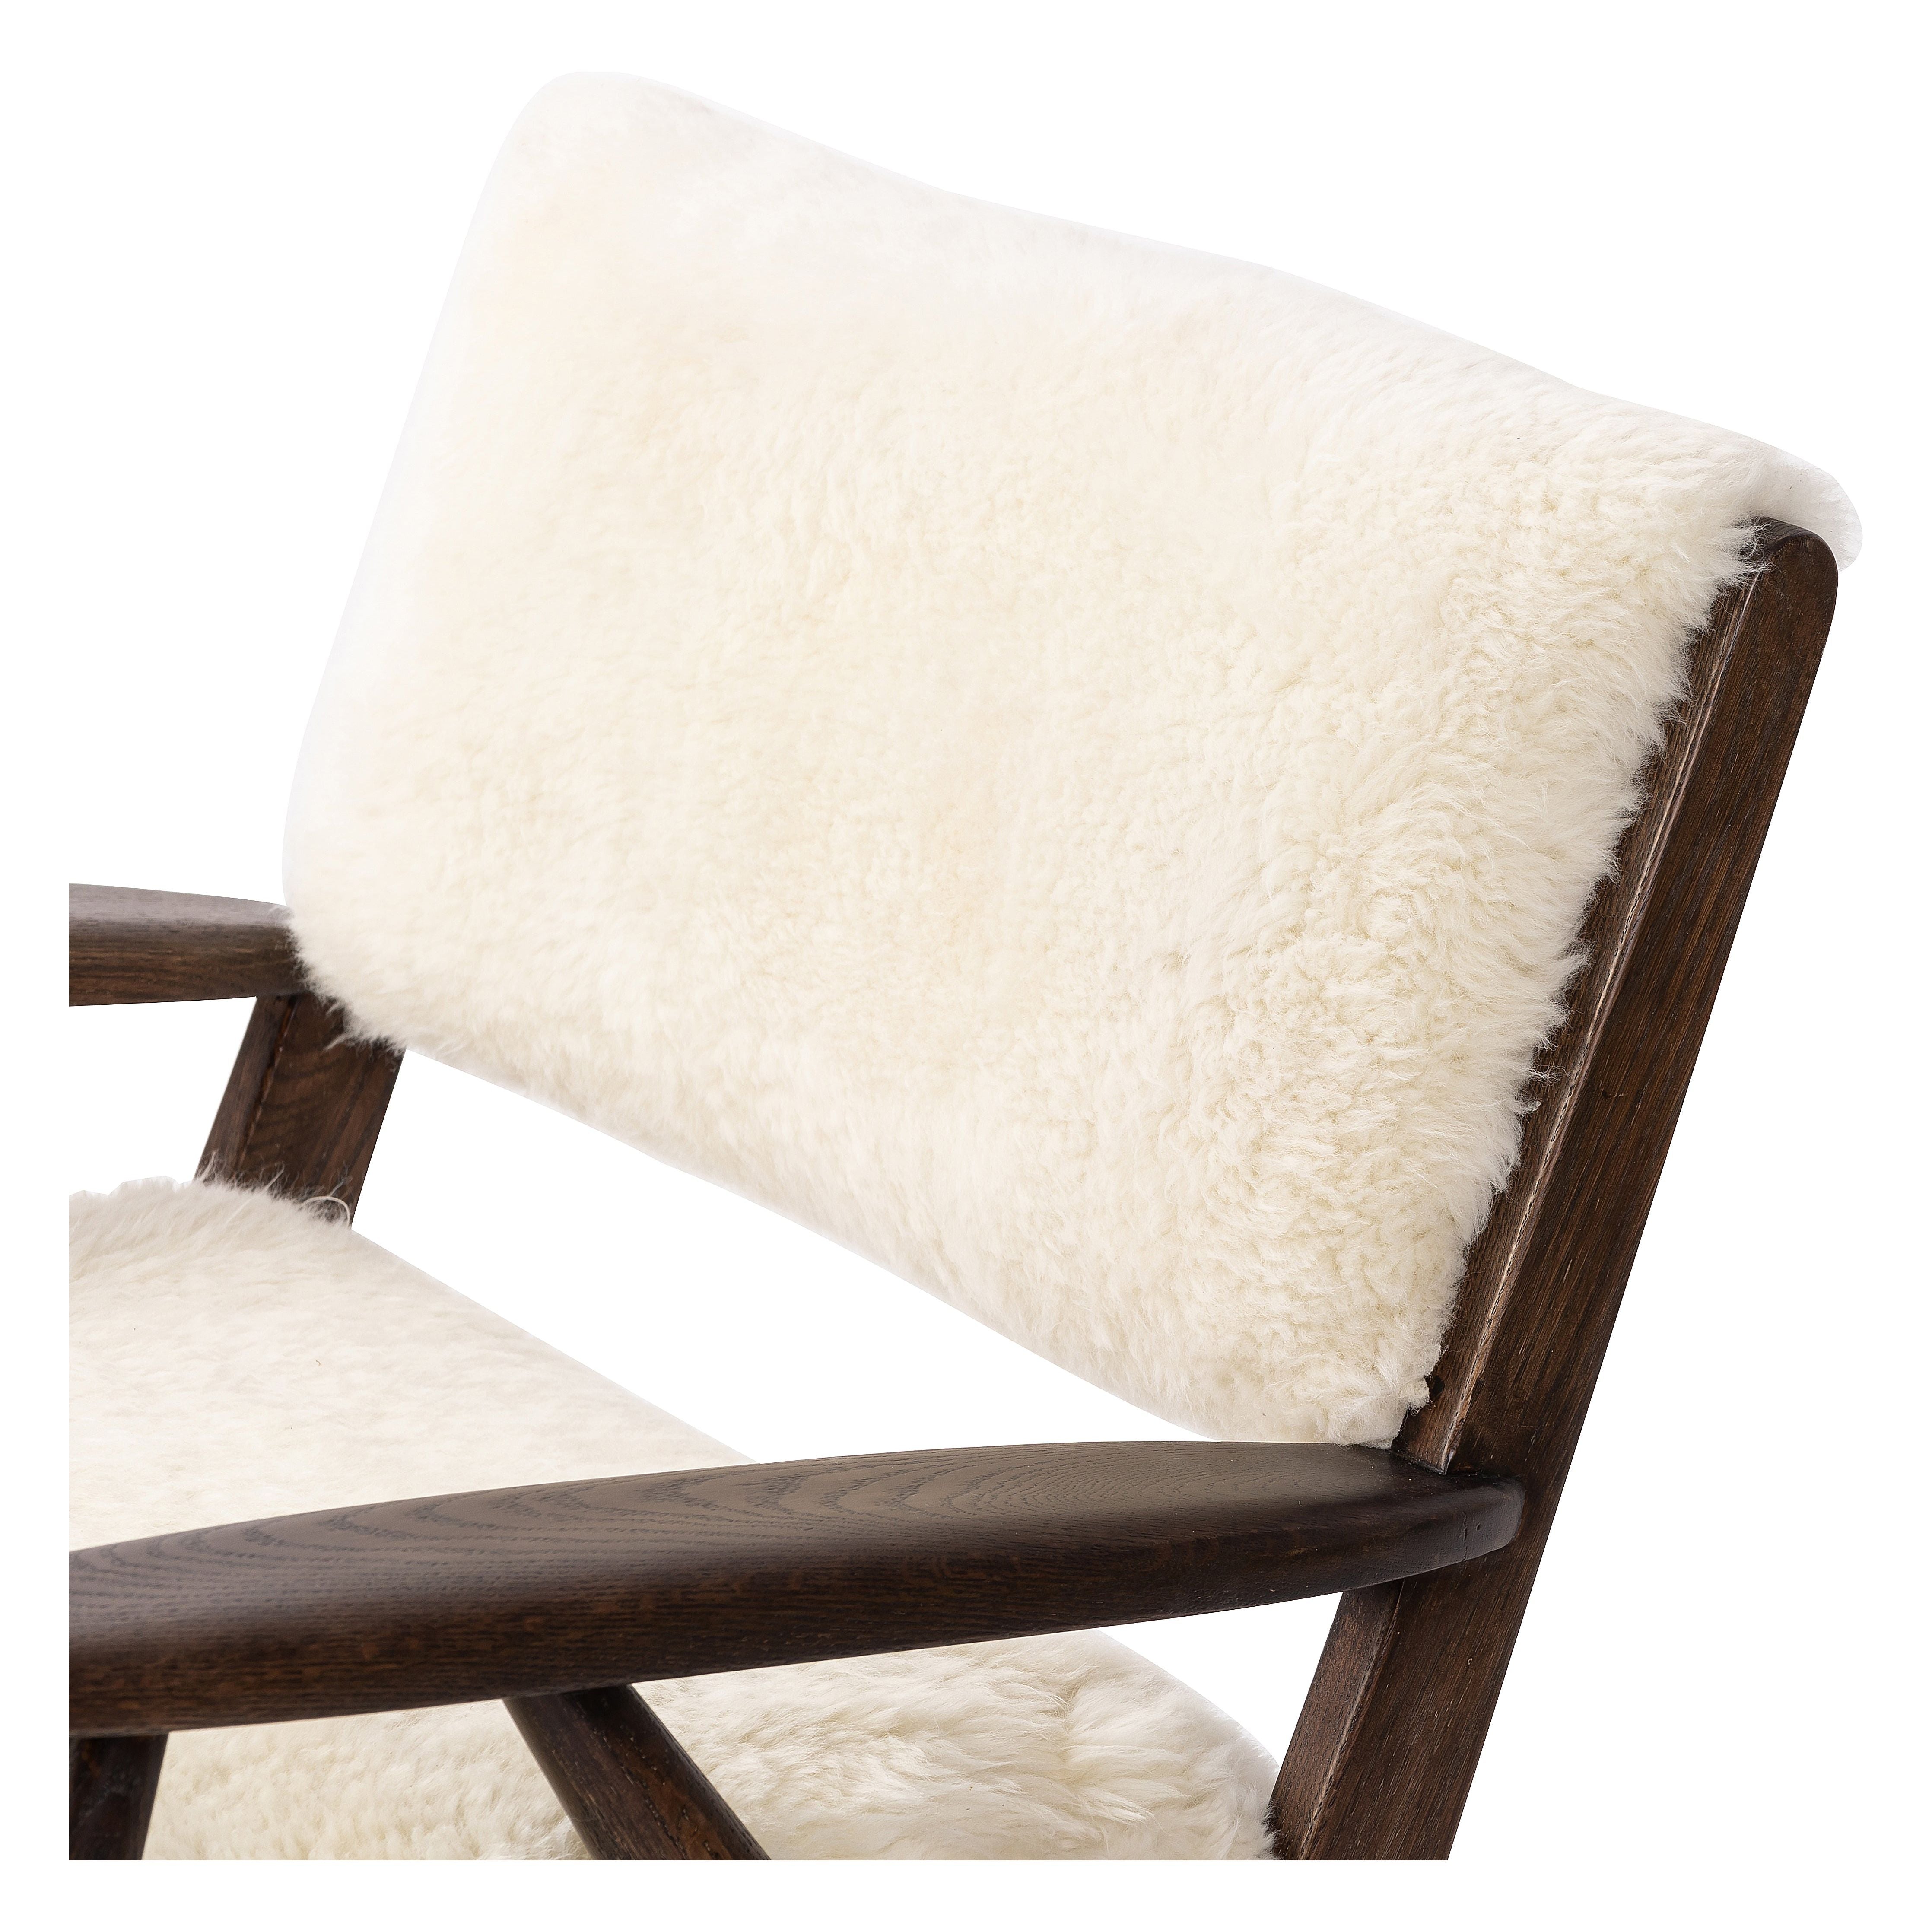 A modern take on the vintage school chair, upholstered in plush cream shearling of 100% sheepskin. Perfect as an accent chair or in pairs. Amethyst Home provides interior design, new construction, custom furniture, and area rugs in the San Diego metro area.